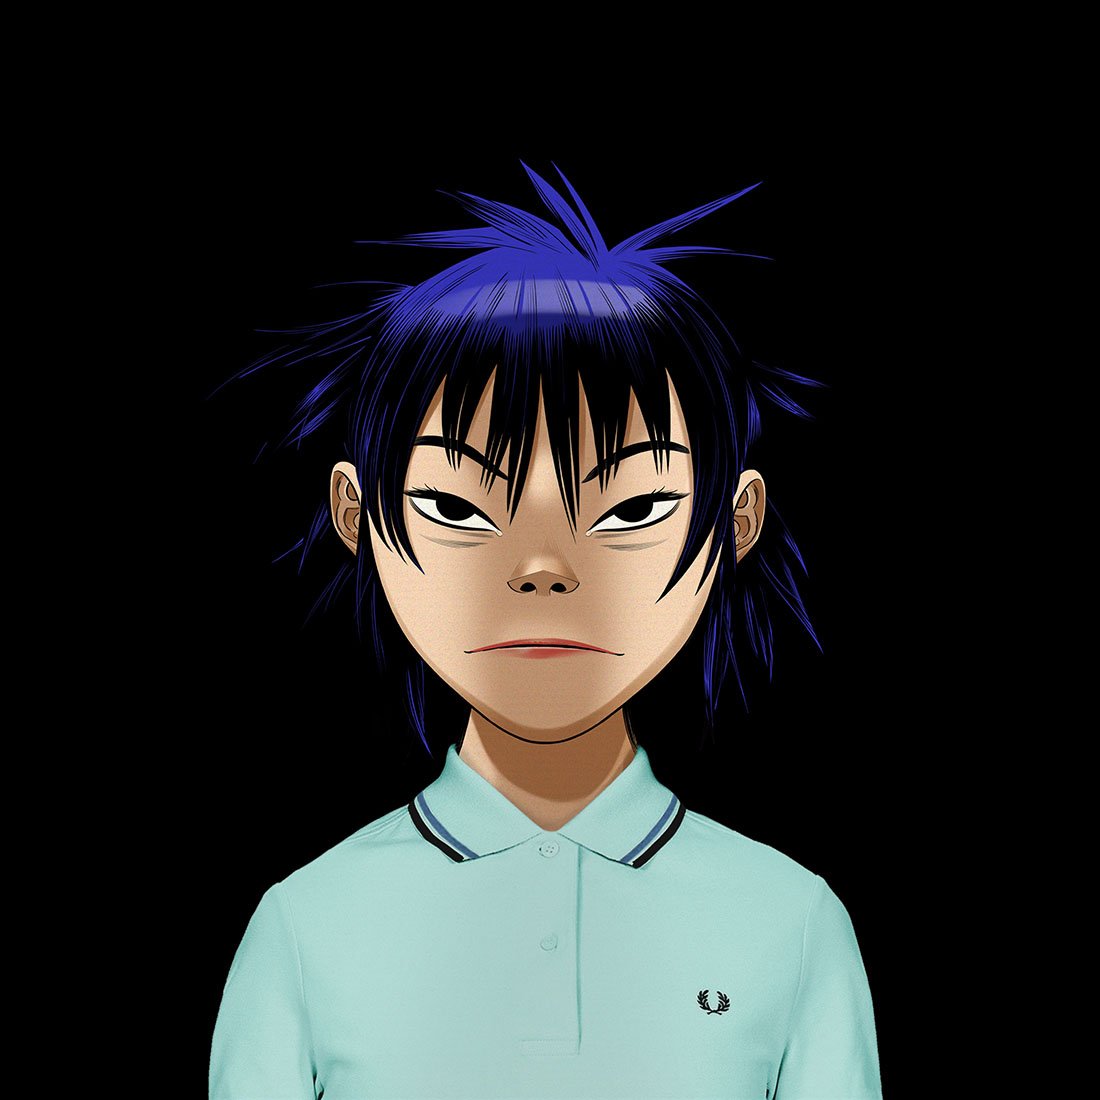 Fred Perry x Gorillaz - Noodle